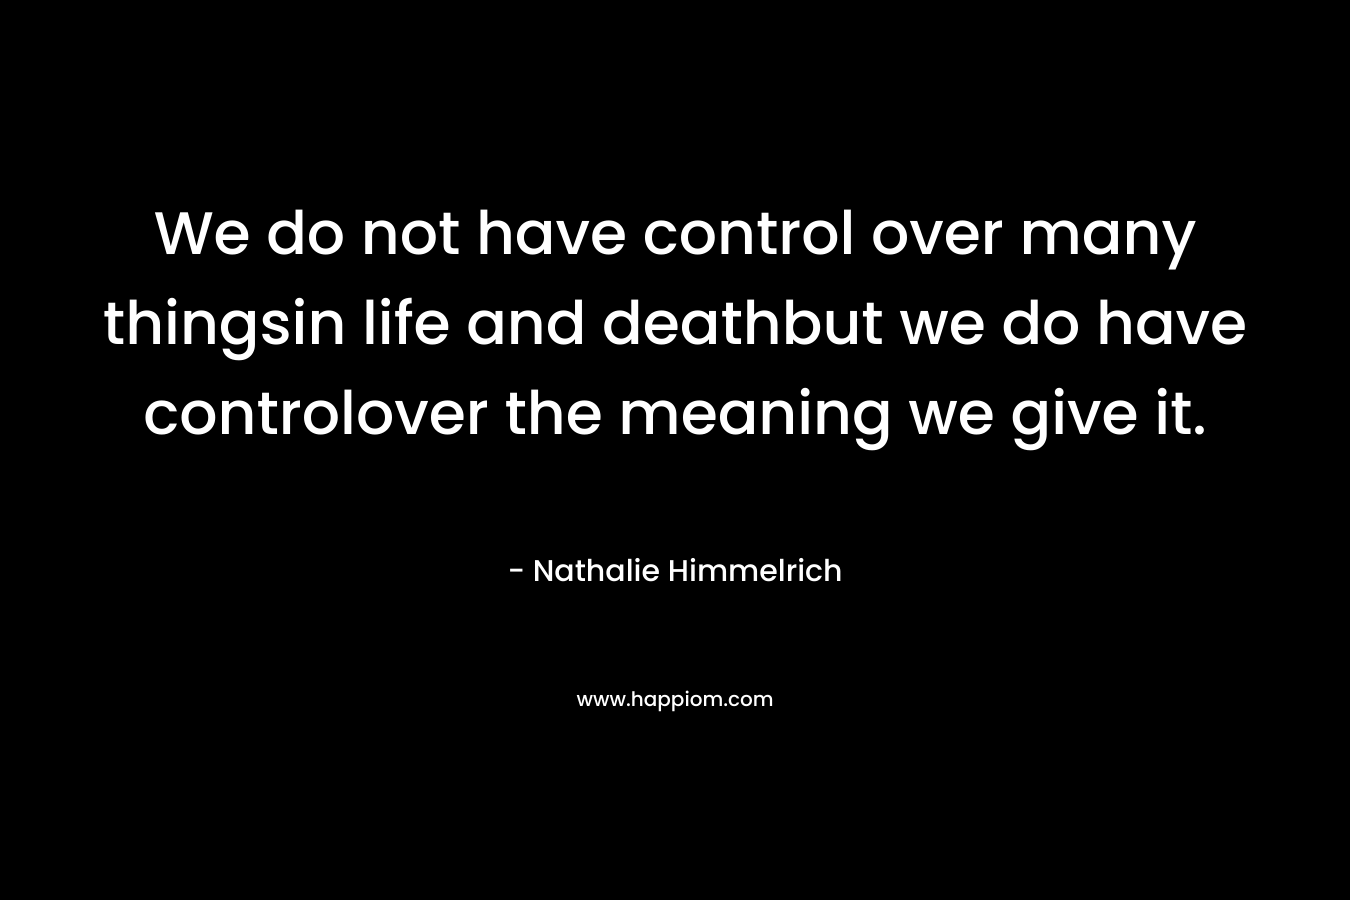 We do not have control over many thingsin life and deathbut we do have controlover the meaning we give it. – Nathalie Himmelrich